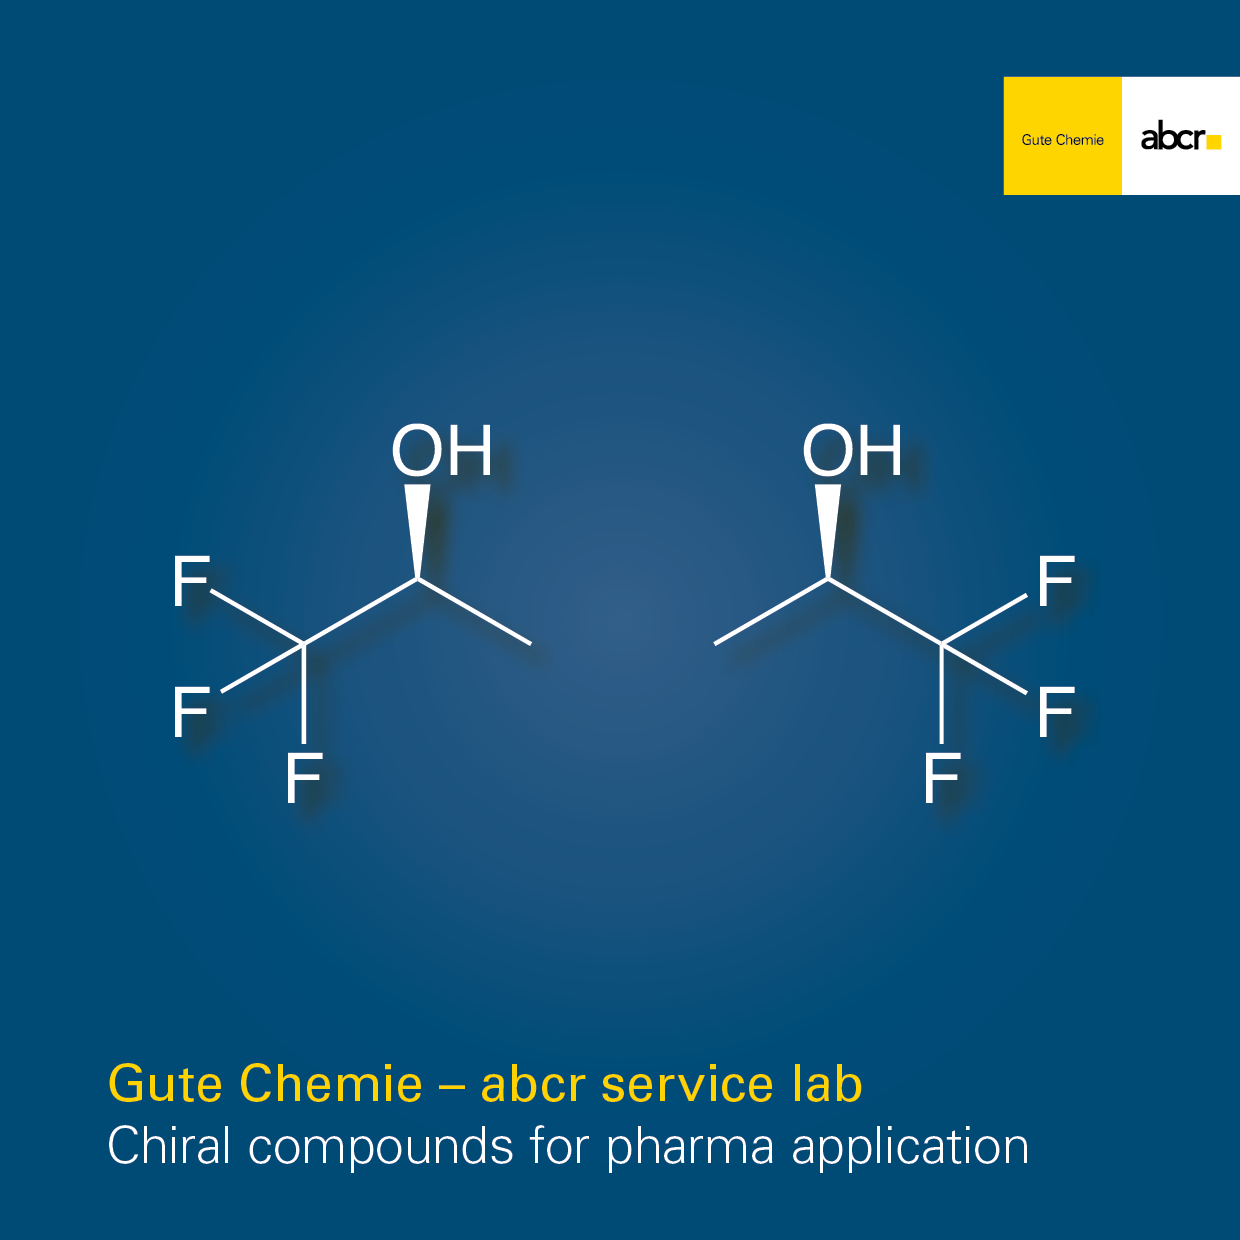 Chiral compounds for pharma application - abcr service lab